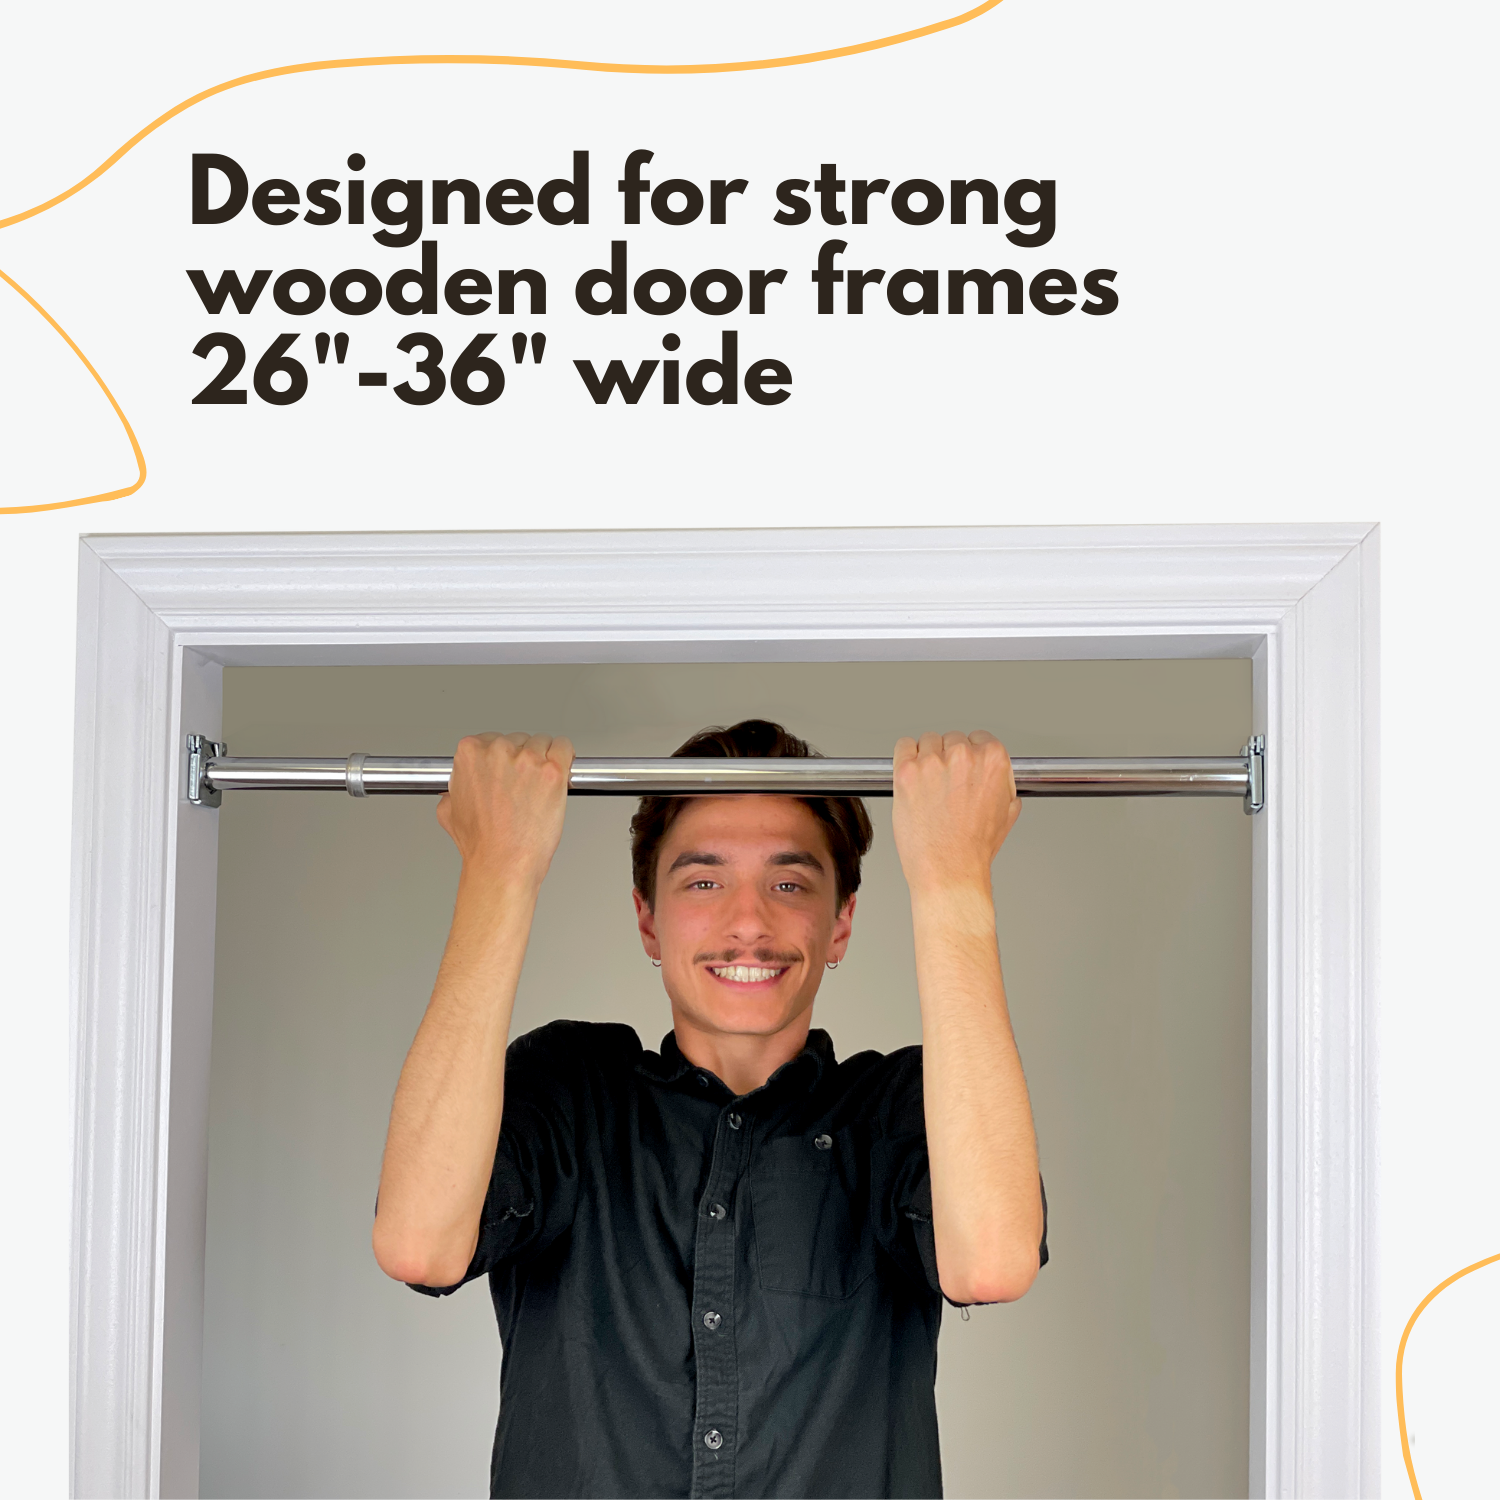 DreamGYM Doorway bar desogned for strong wooden door frames 26-36 inches wide. Young adult is doing pull-ups on screw-in chin-up bar